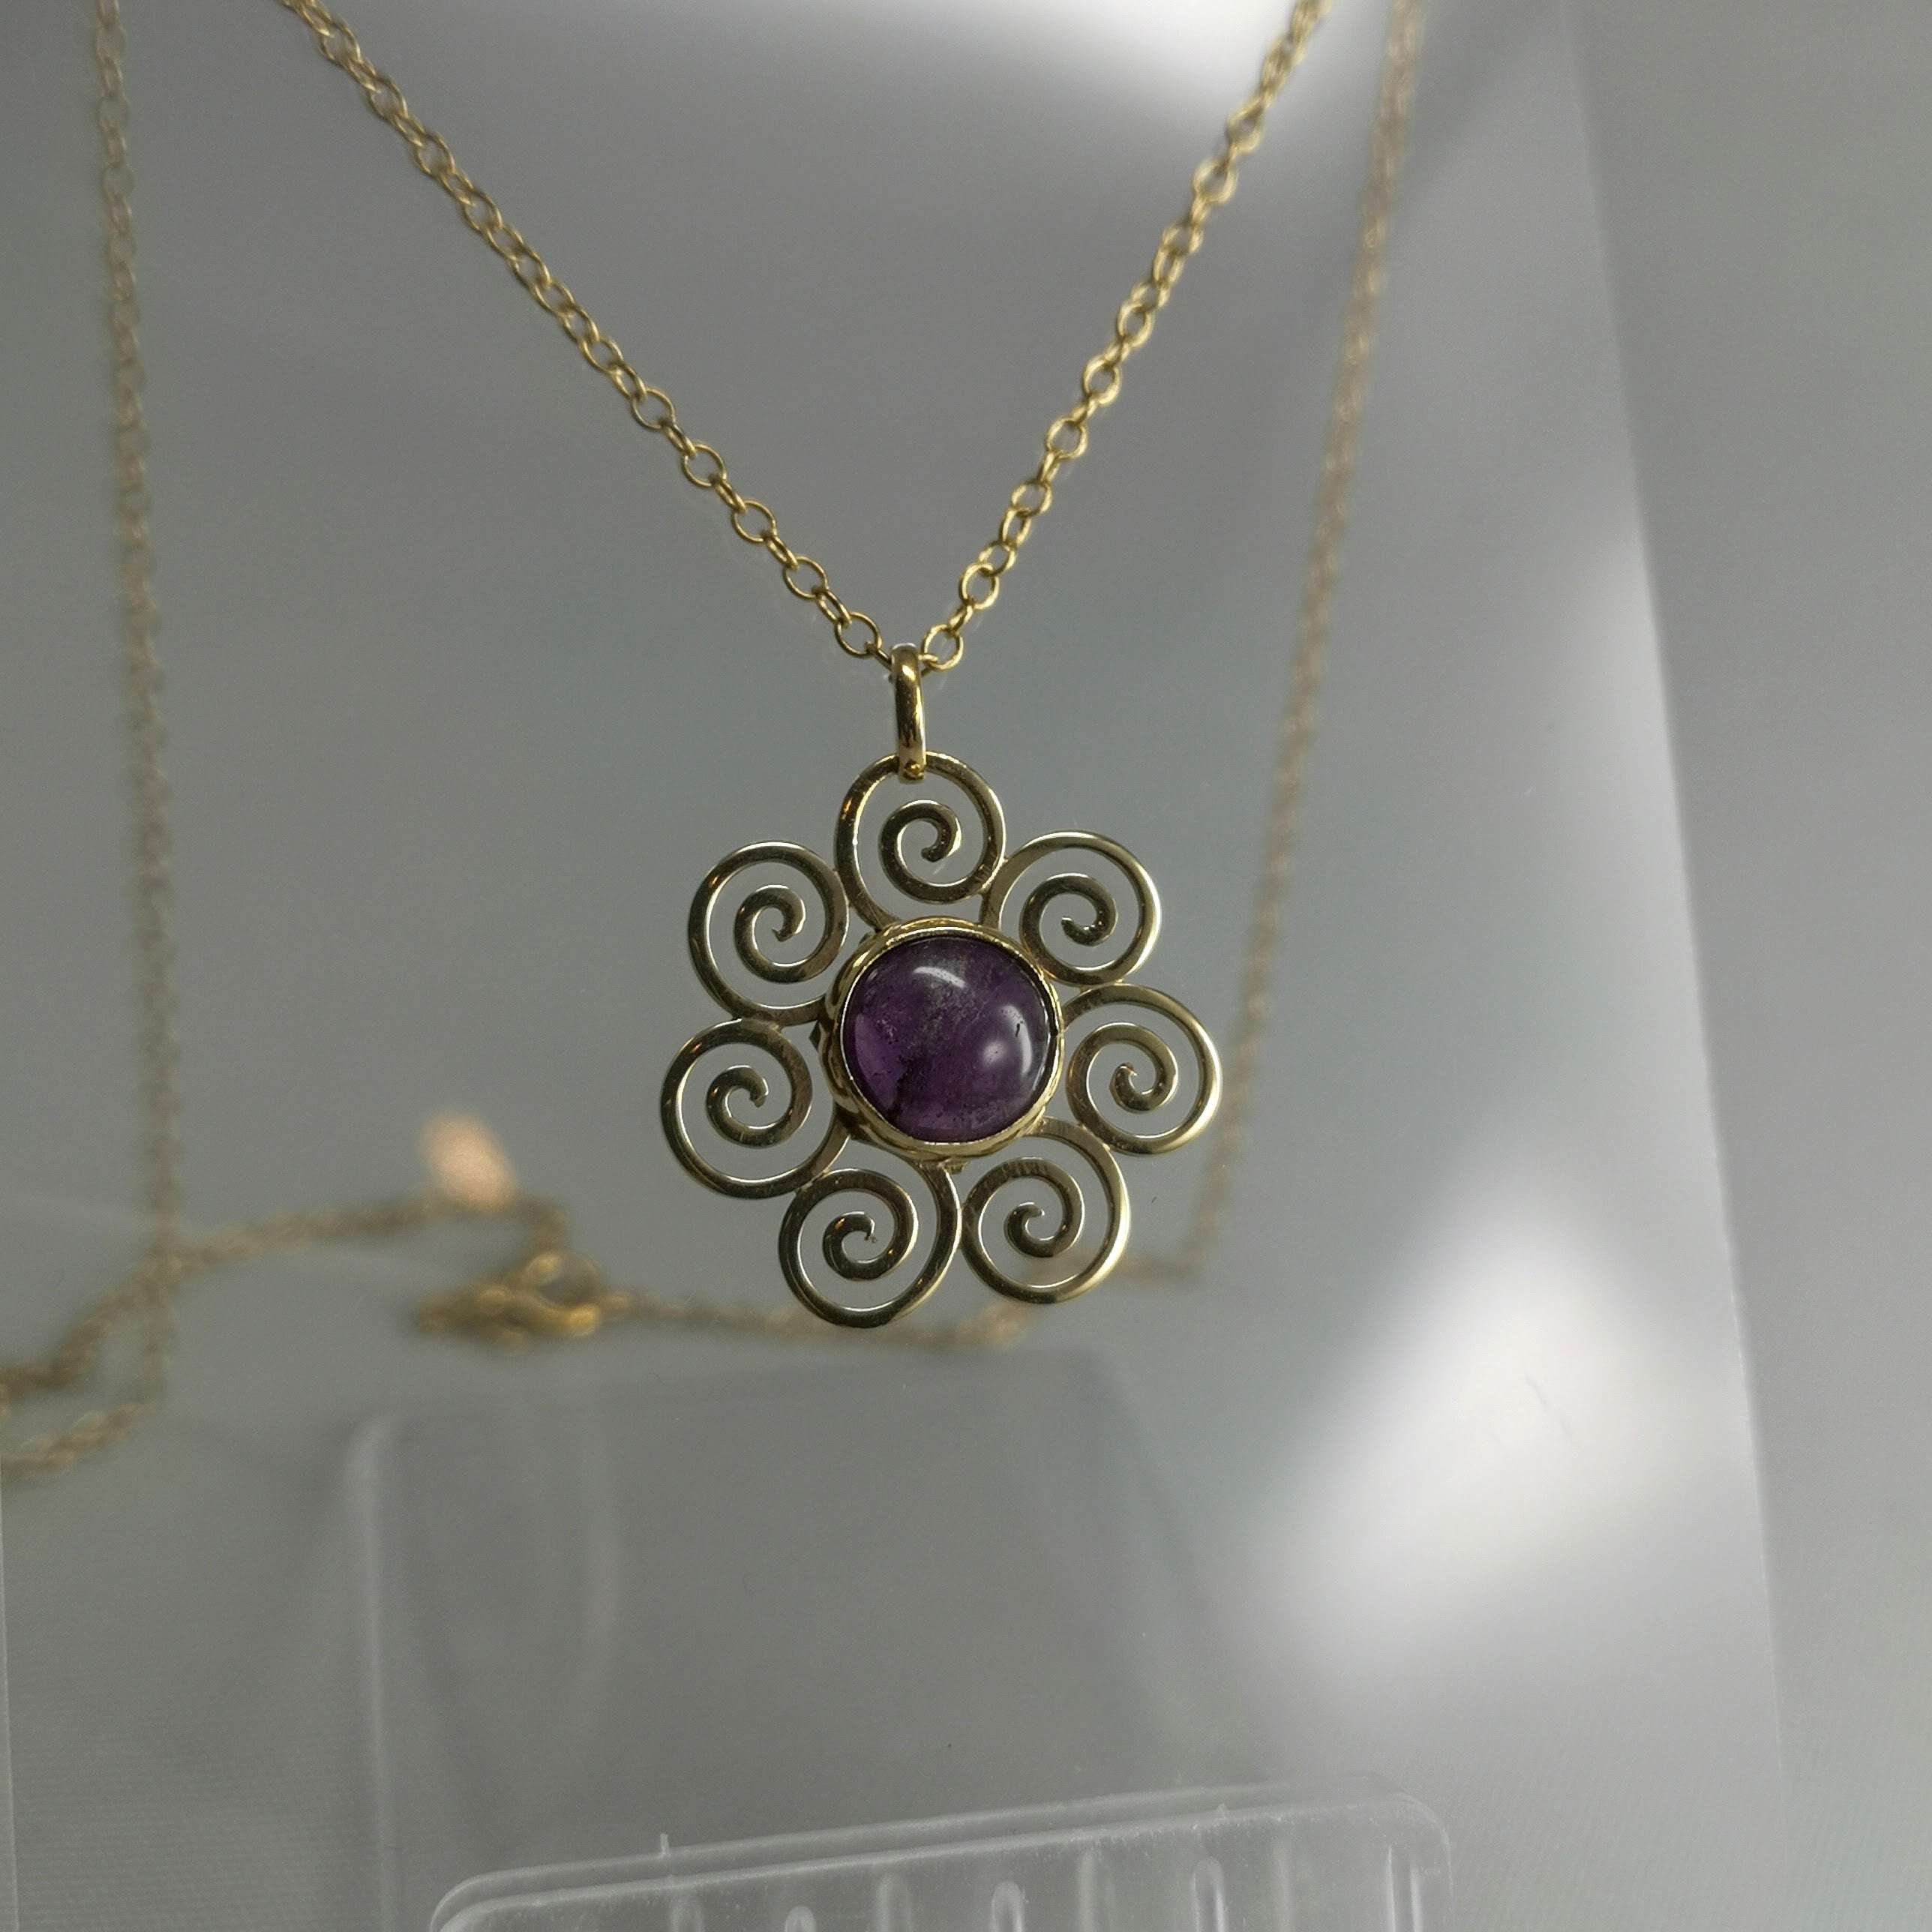 9ct Gold decorative pendant with an amethyst stone and with 18" stone